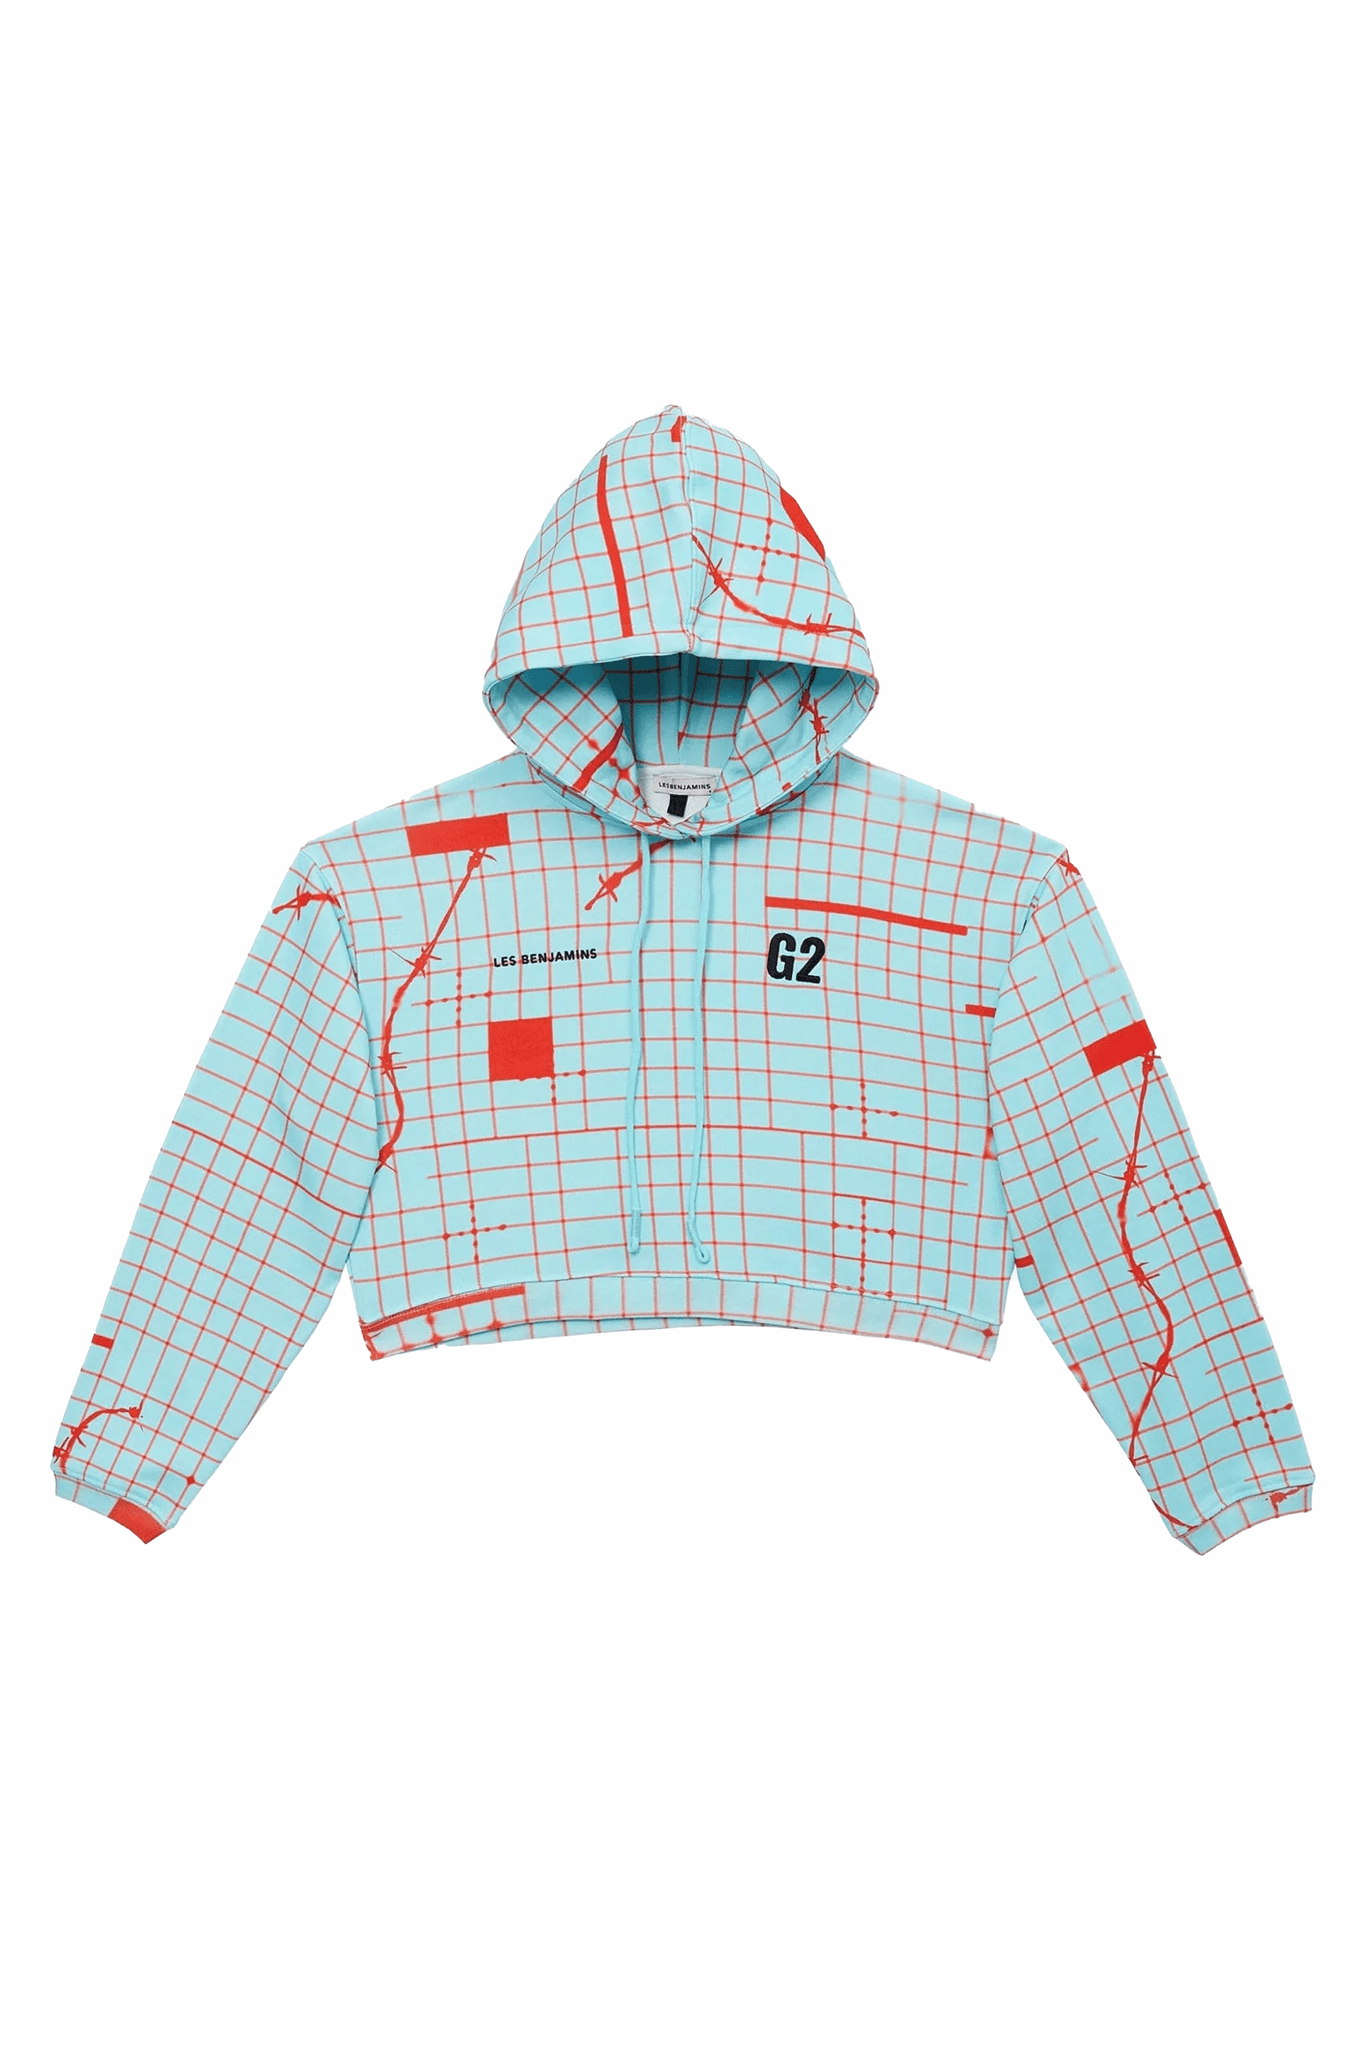 G2 x LB light blue cropped hoodie, a chic collaboration . Elevate your style with this unique piece